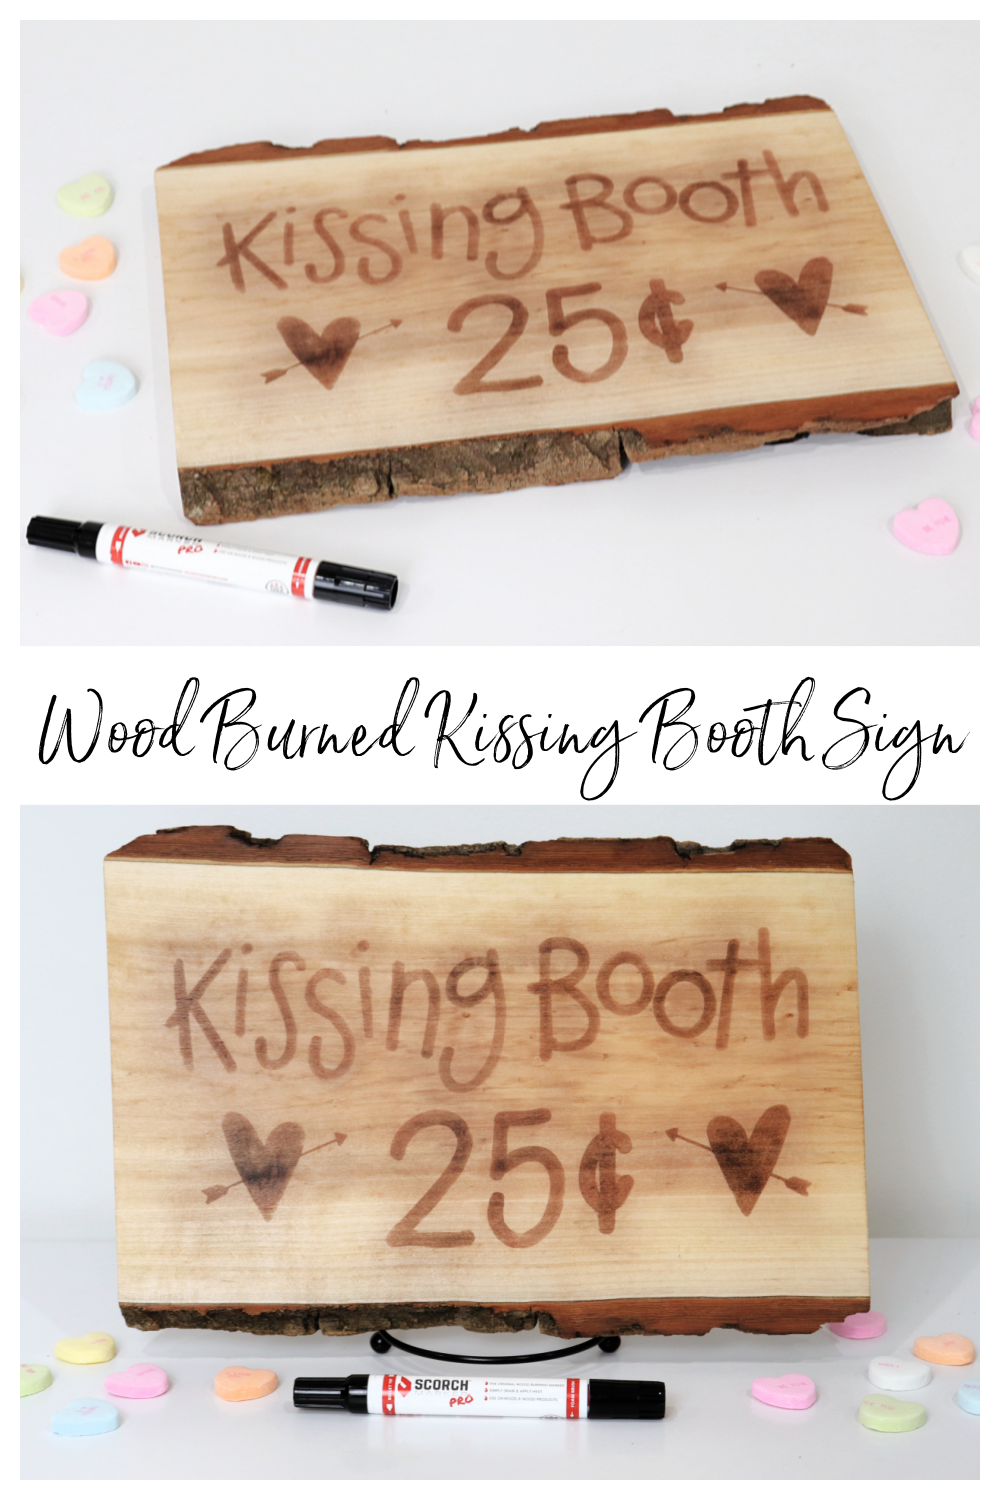 Image is a collage of images featuring a wood burned kissing booth sign.